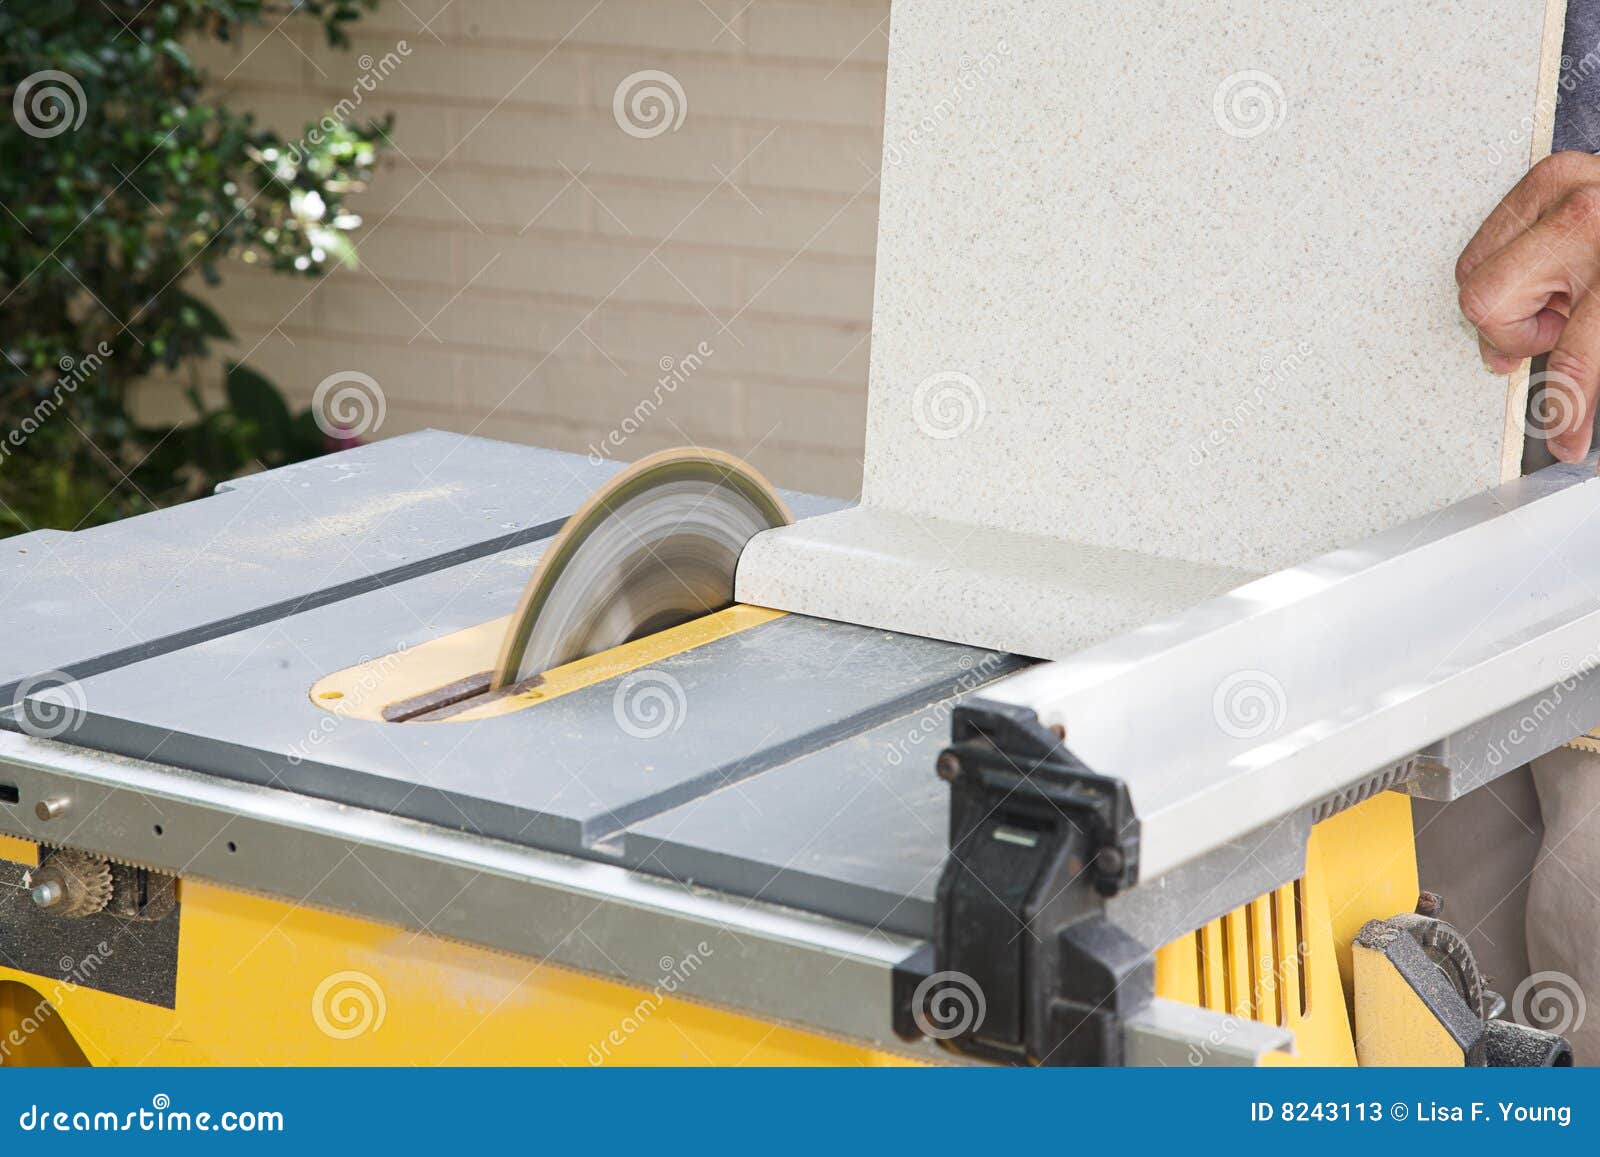 Table Saw Cutting Laminate Stock Image Image Of Contractor 8243113